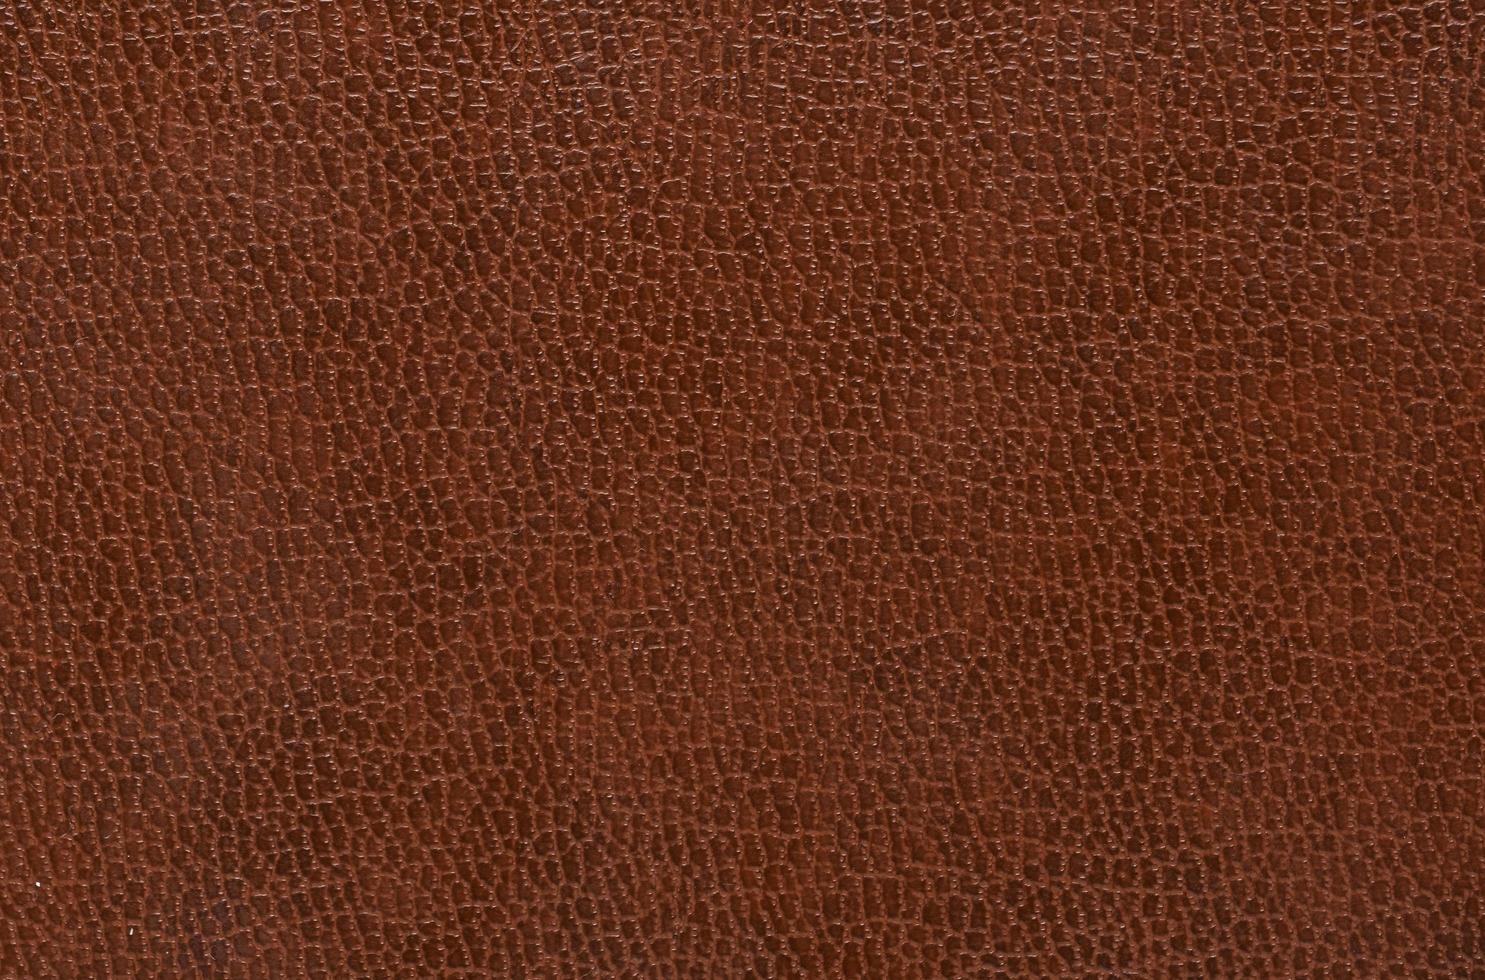 Full Frame Brown Leather Background, Leather Picture Frame